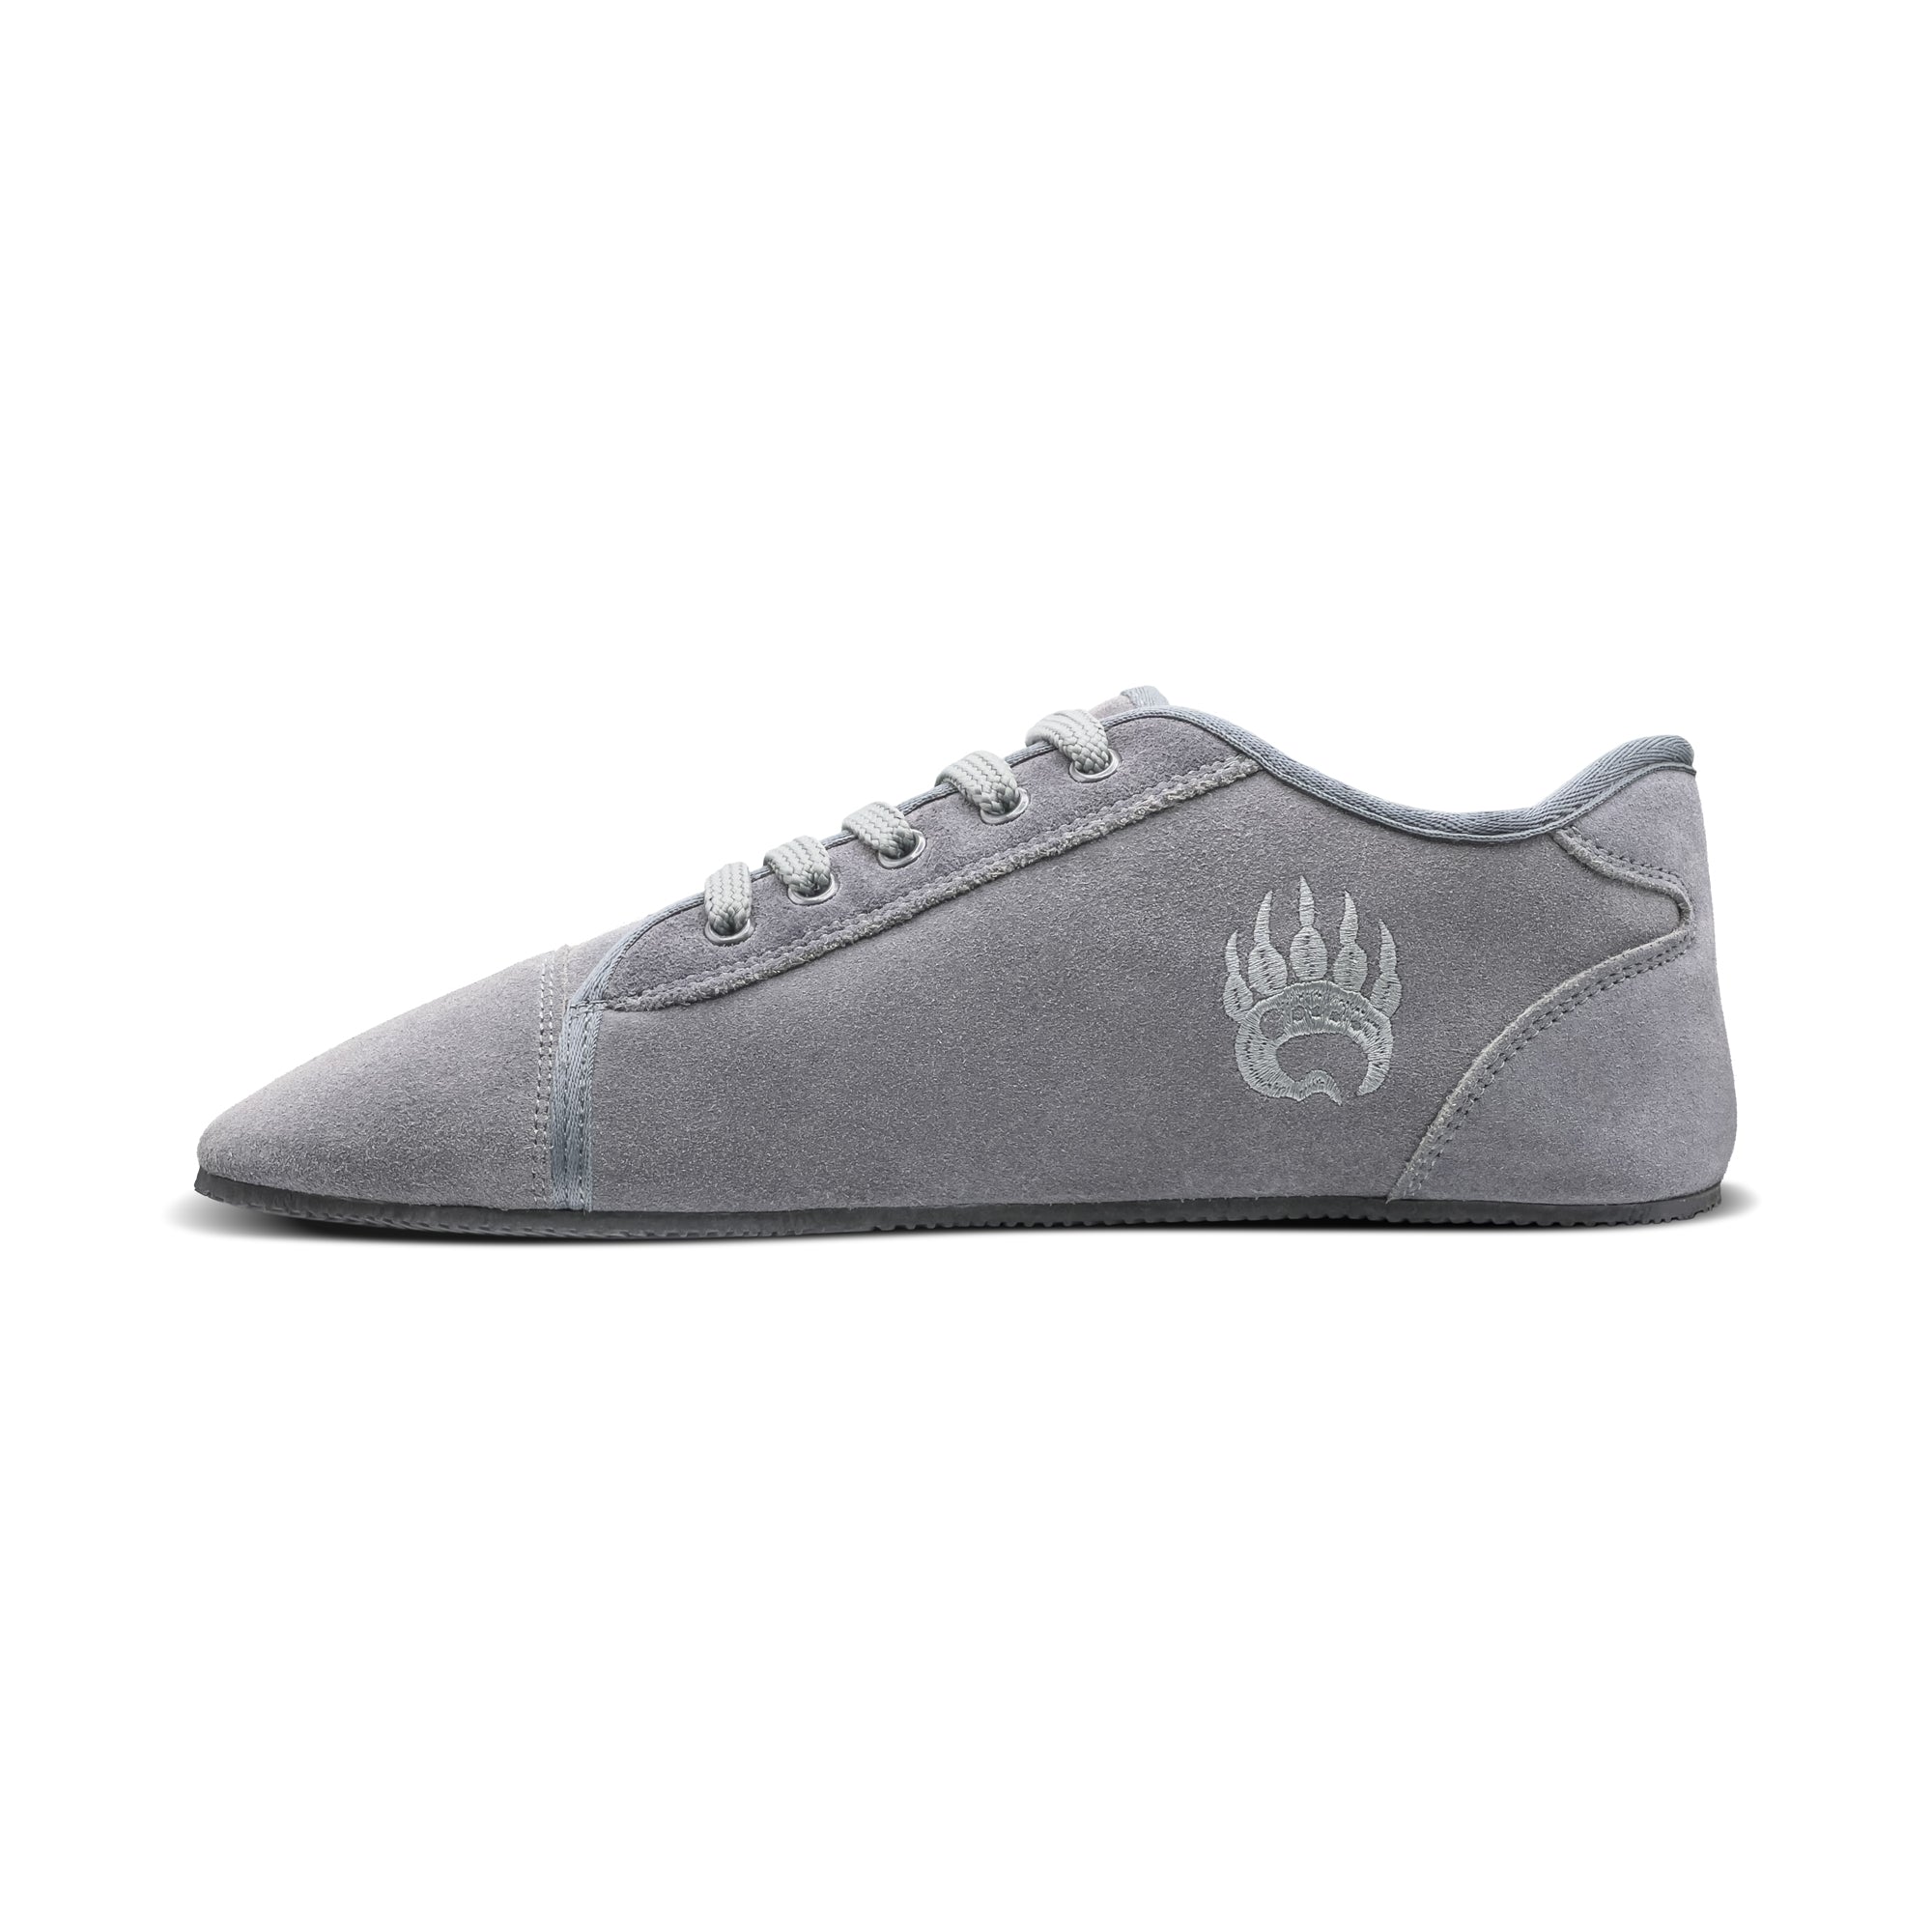 A profile view of a Bearfoot Ursus Suede Low-Top Ice Grey sneaker with a darker grey logo on the side, featuring a minimalist design and flat sole, laced up with white laces.